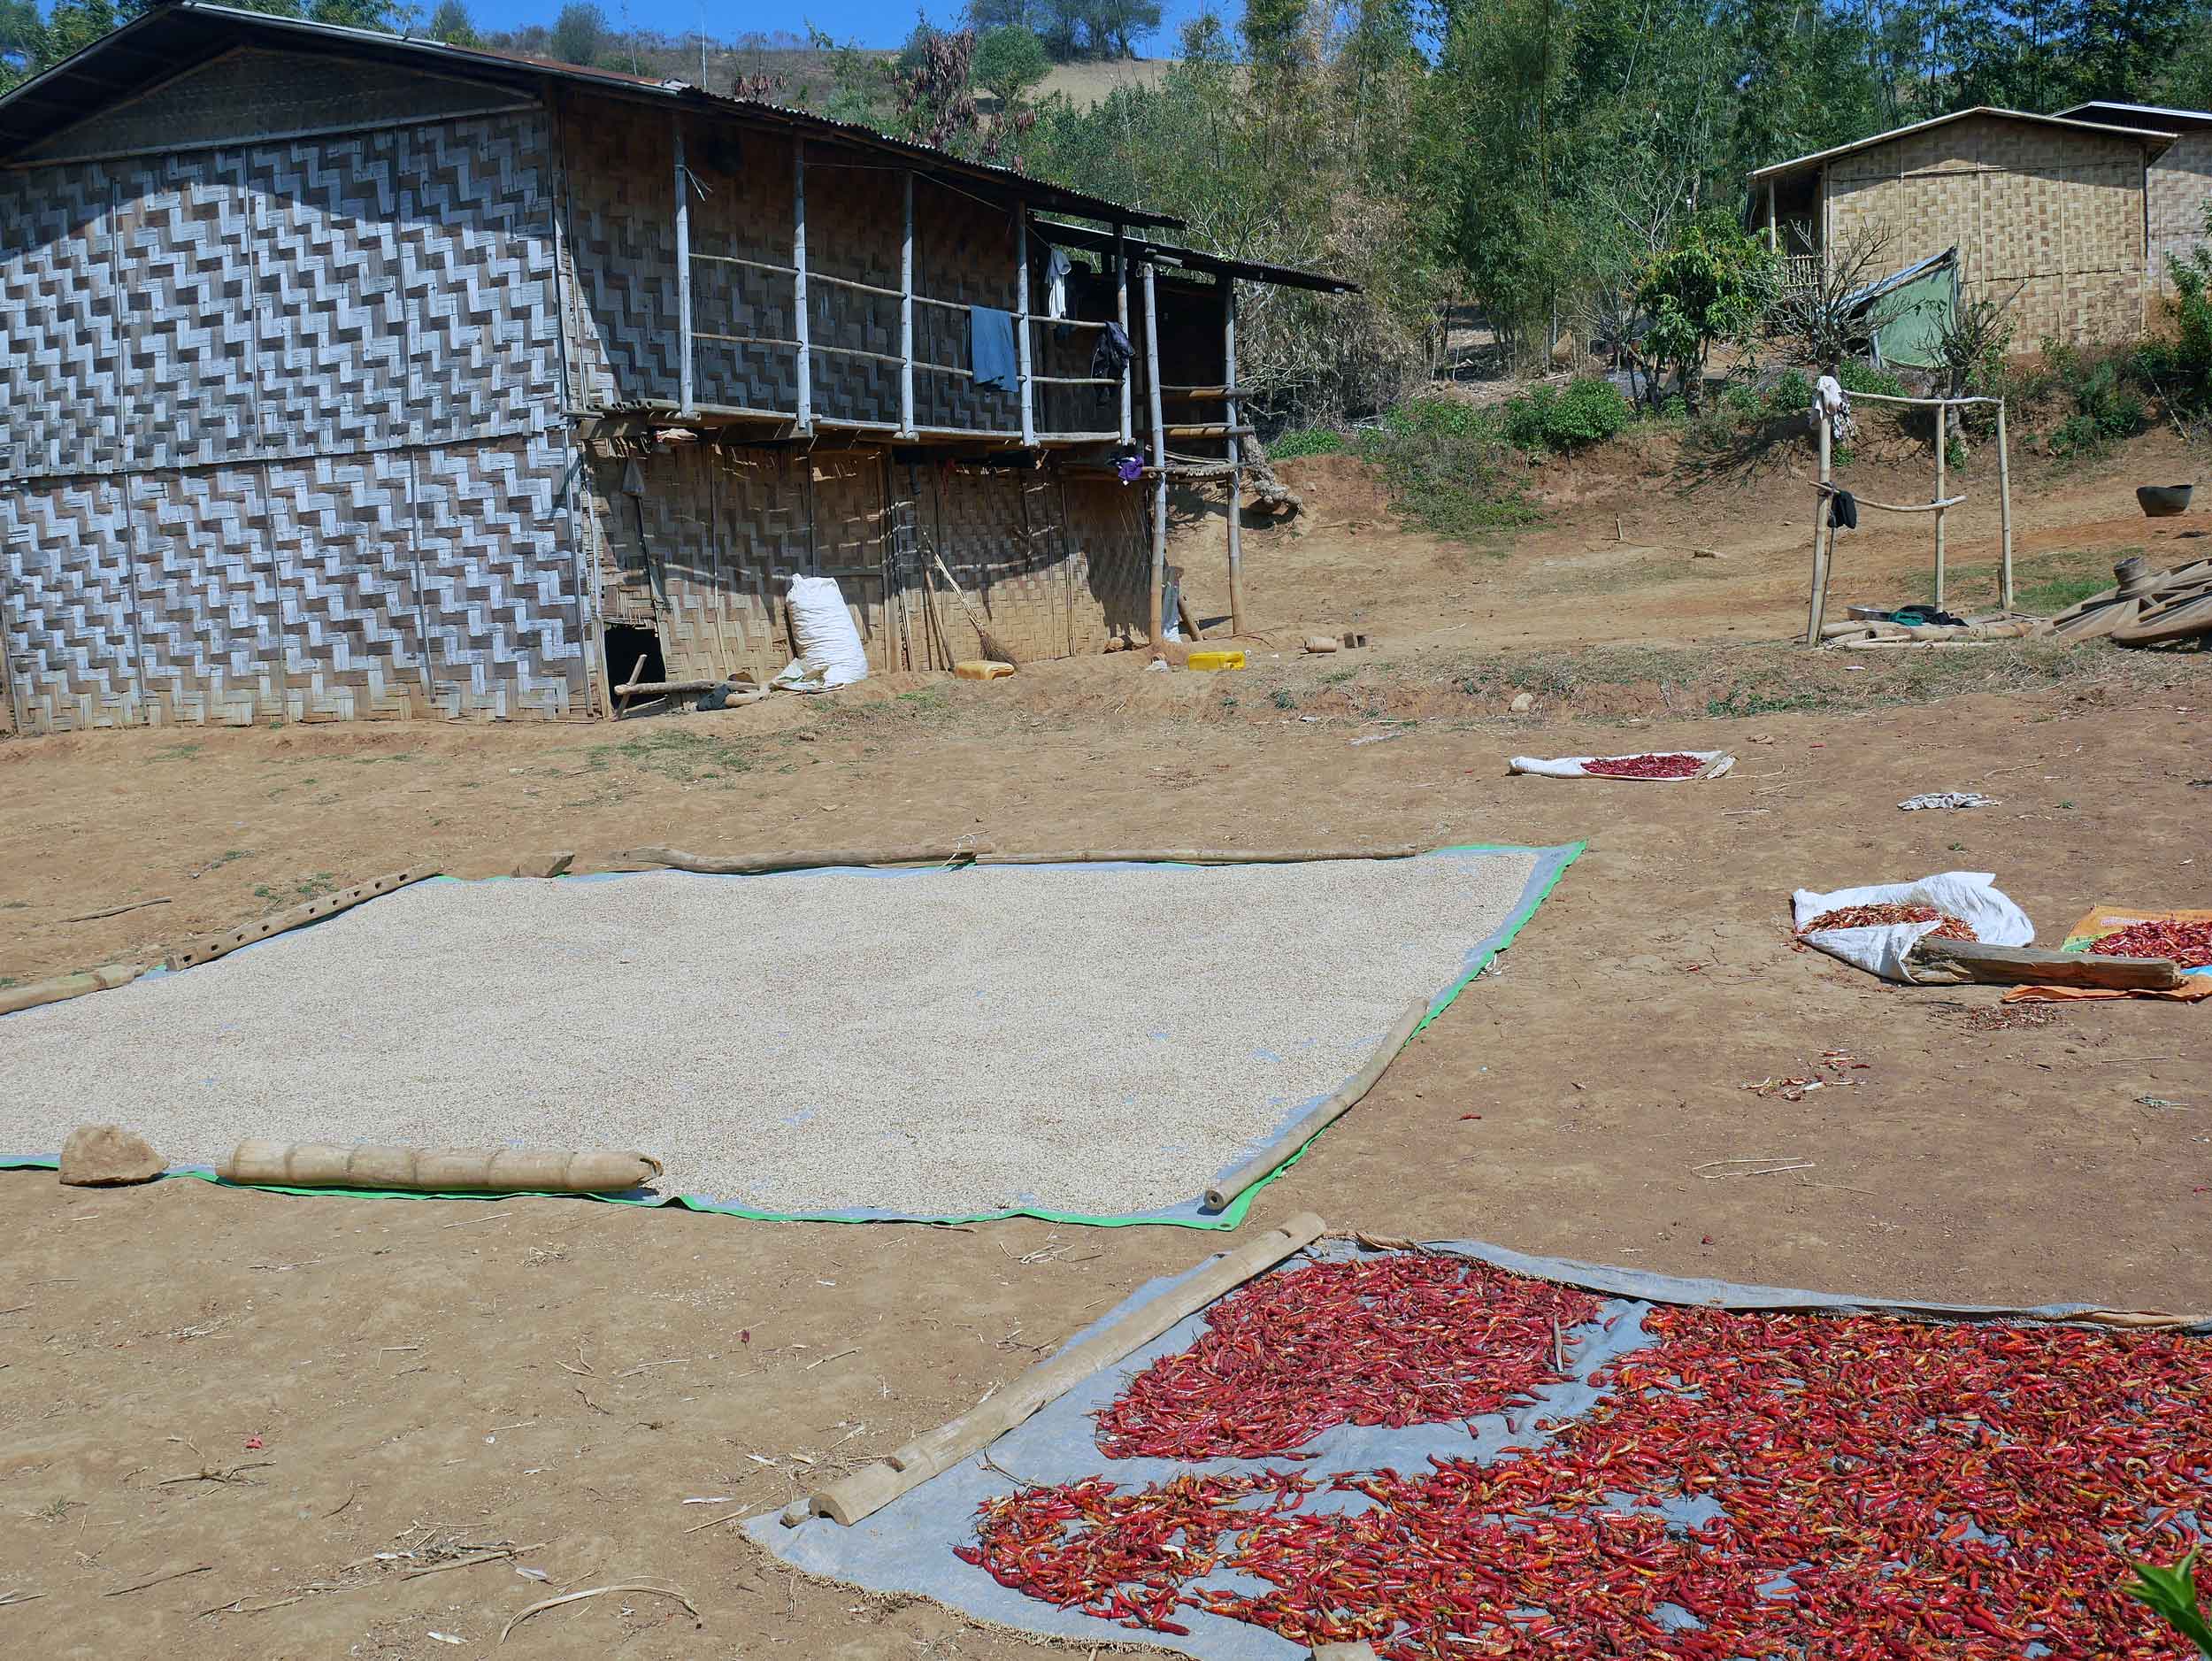  A common sight, rice and red chiles, which are grown in abundance in this area, spread out on canvases to dry in the hot sun (Feb 20). 